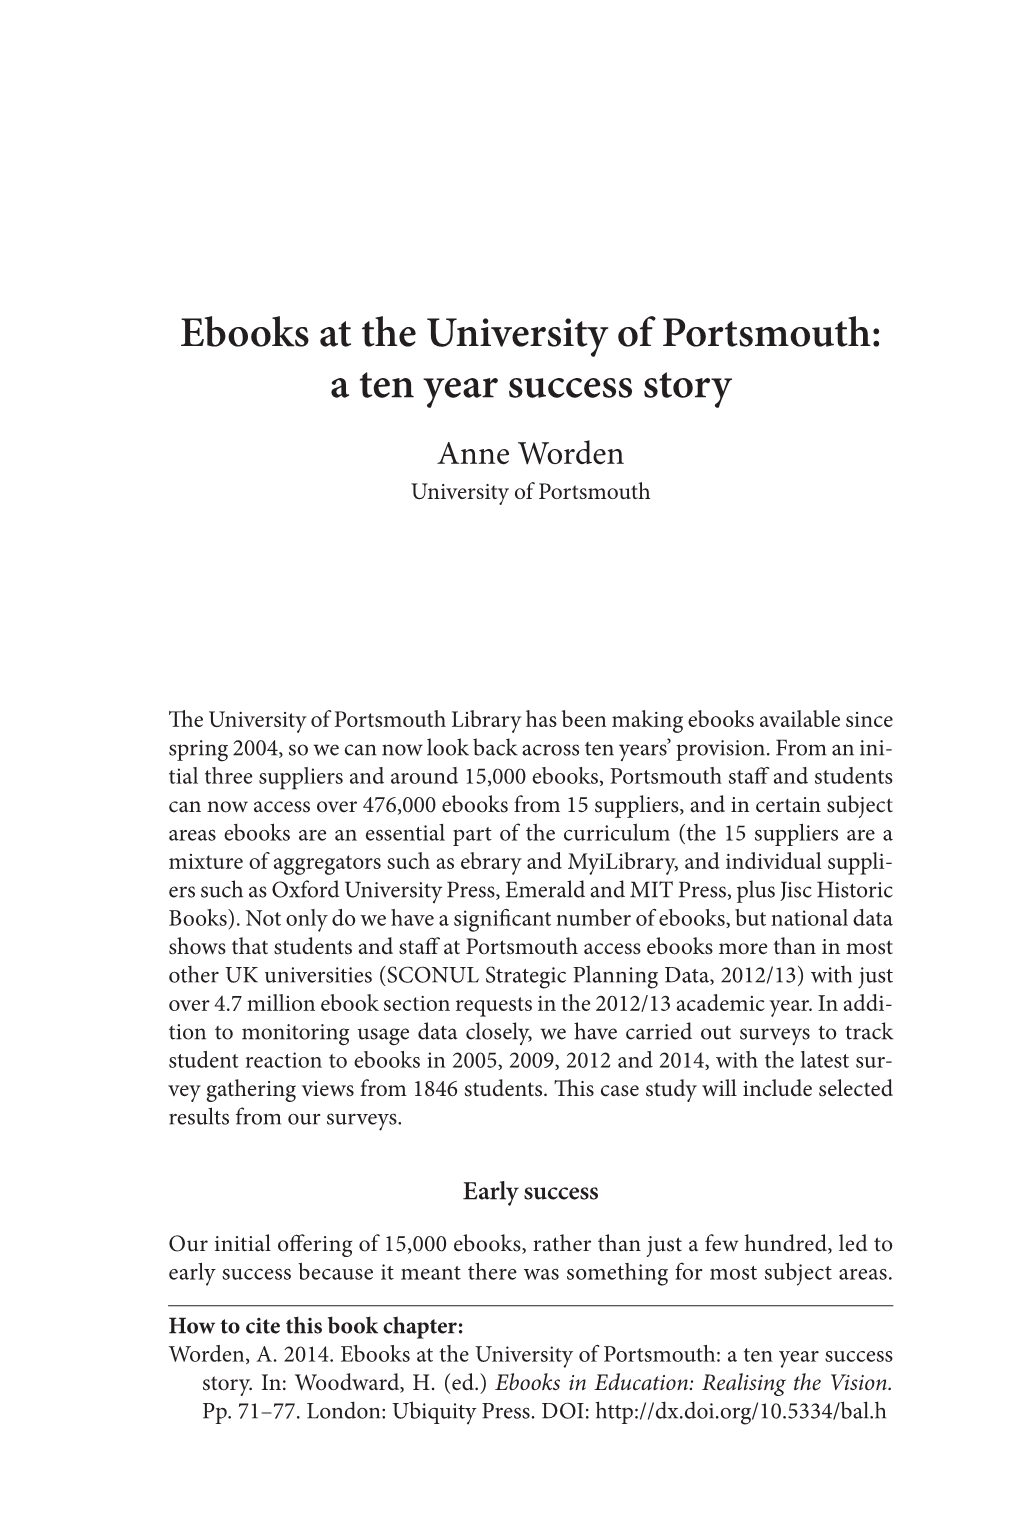 Ebooks at the University of Portsmouth: a Ten Year Success Story Anne Worden University of Portsmouth